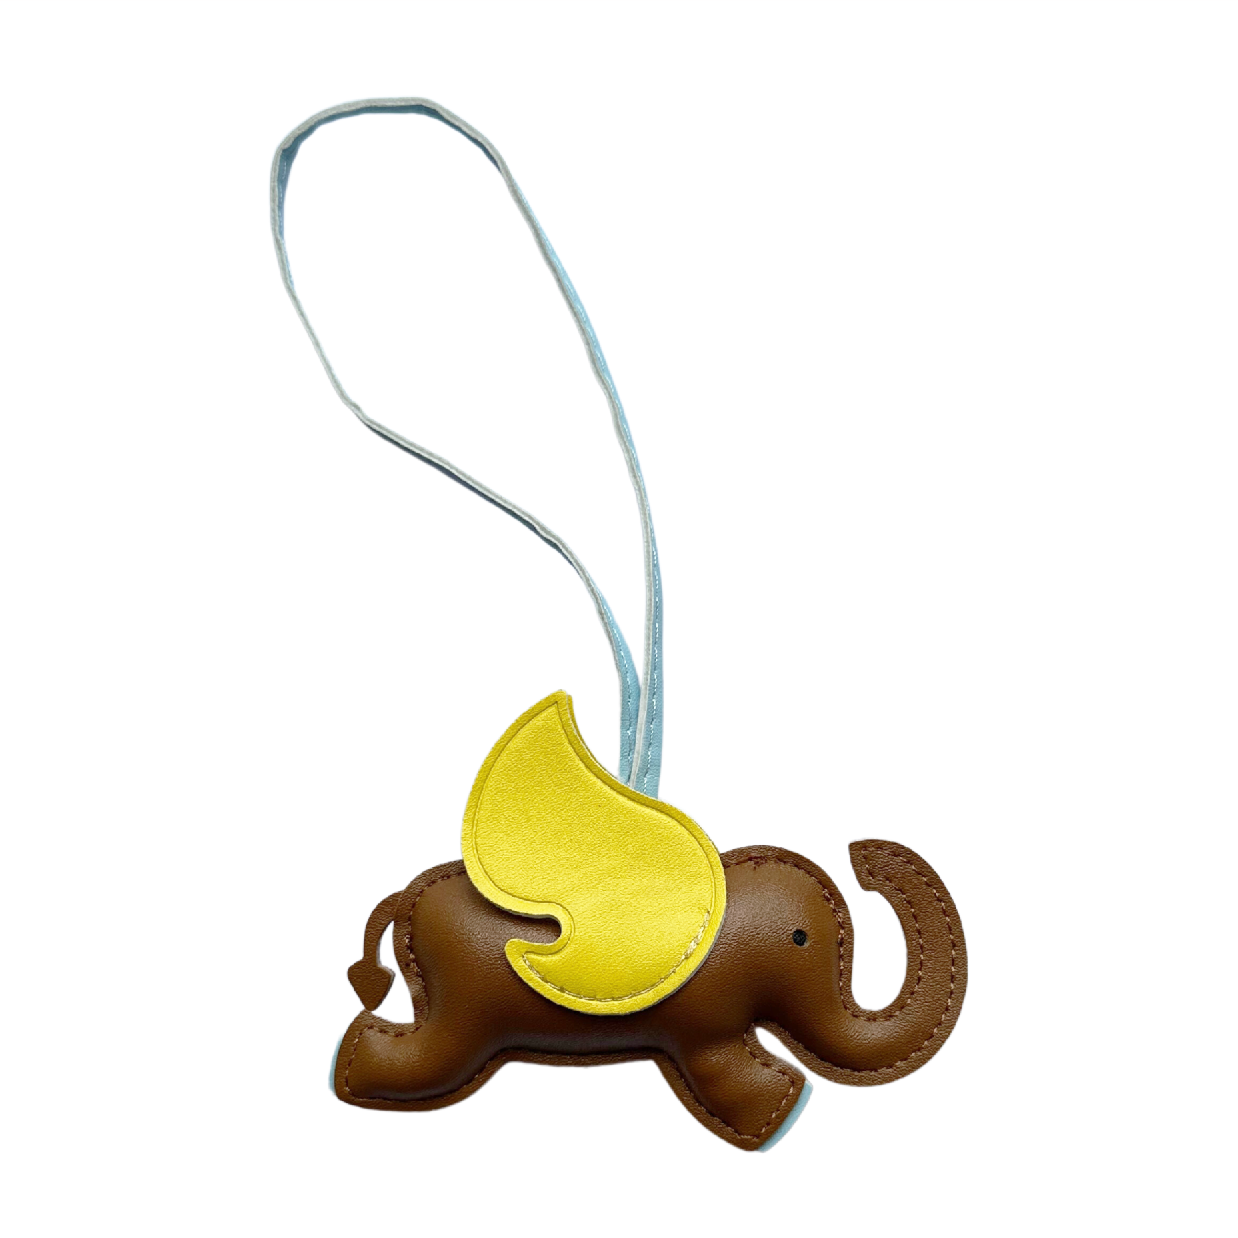 'Elefante Volante' Key Chain/ Bag Charm in Yellow and Brown